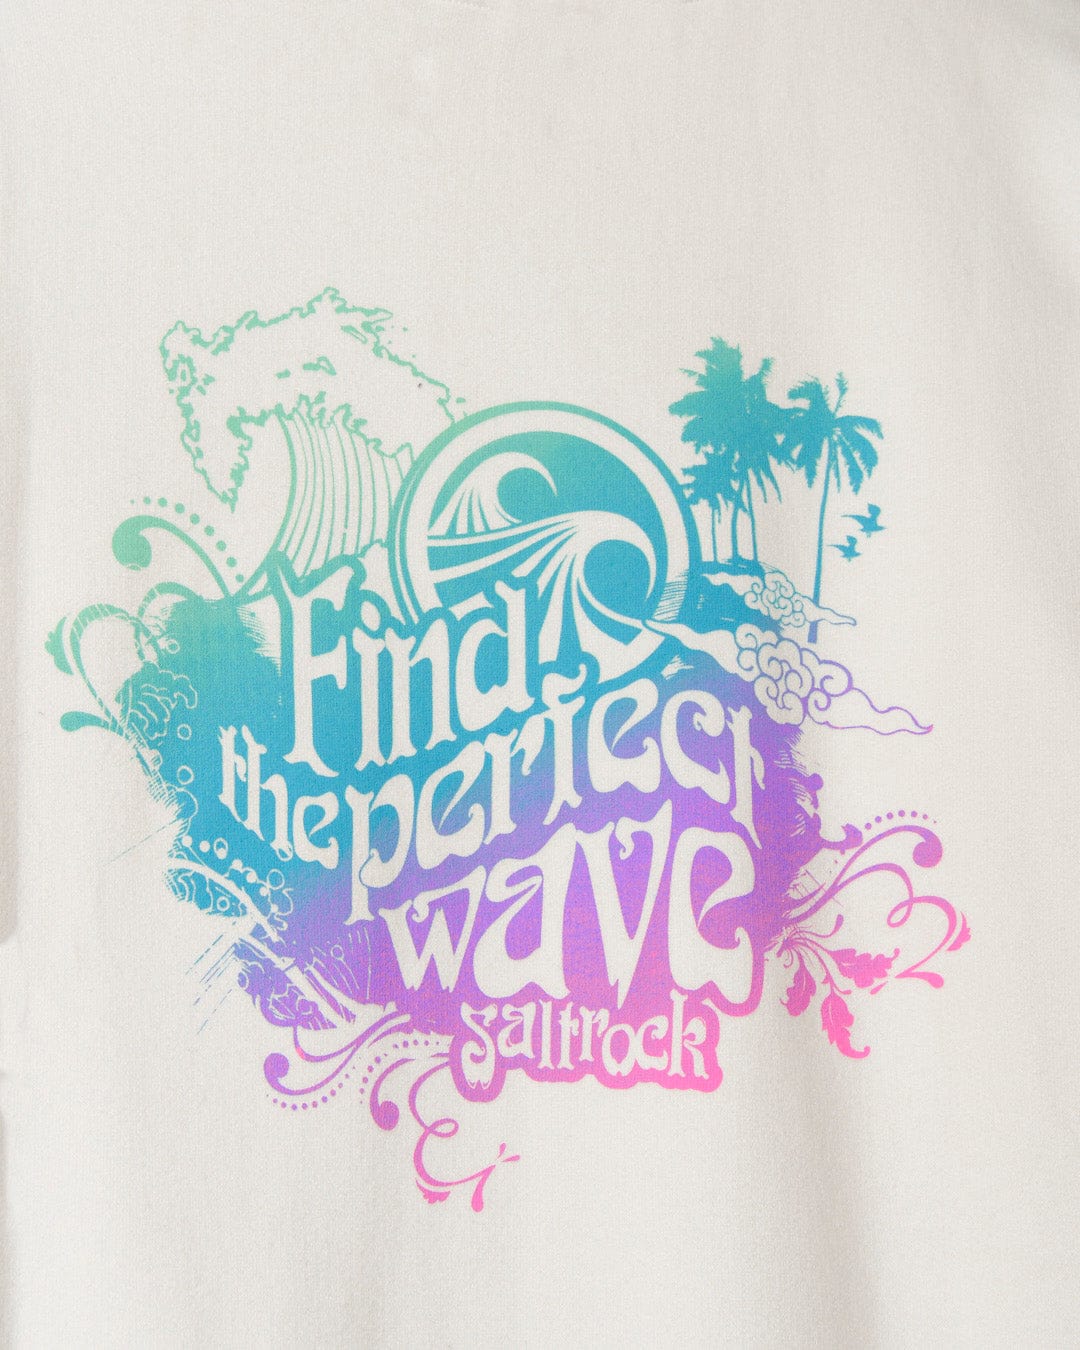 Find the Saltrock Perfect Wave tee with a multi-coloured slogan.